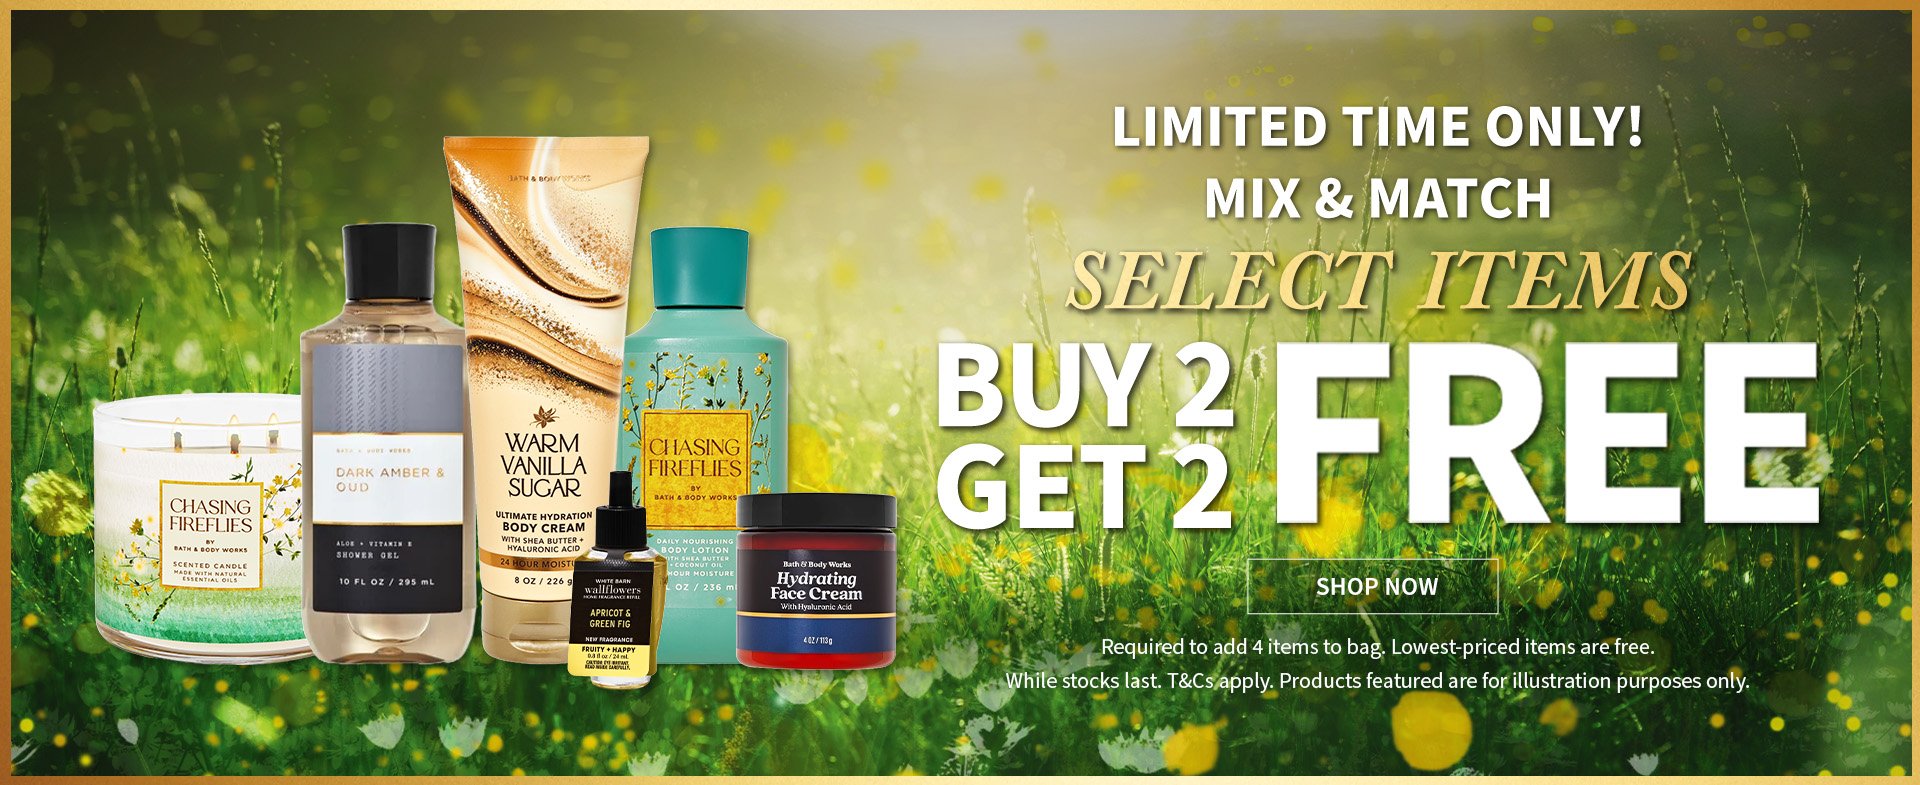 Limited Time Only! Mix and Match Select Items B2g1f